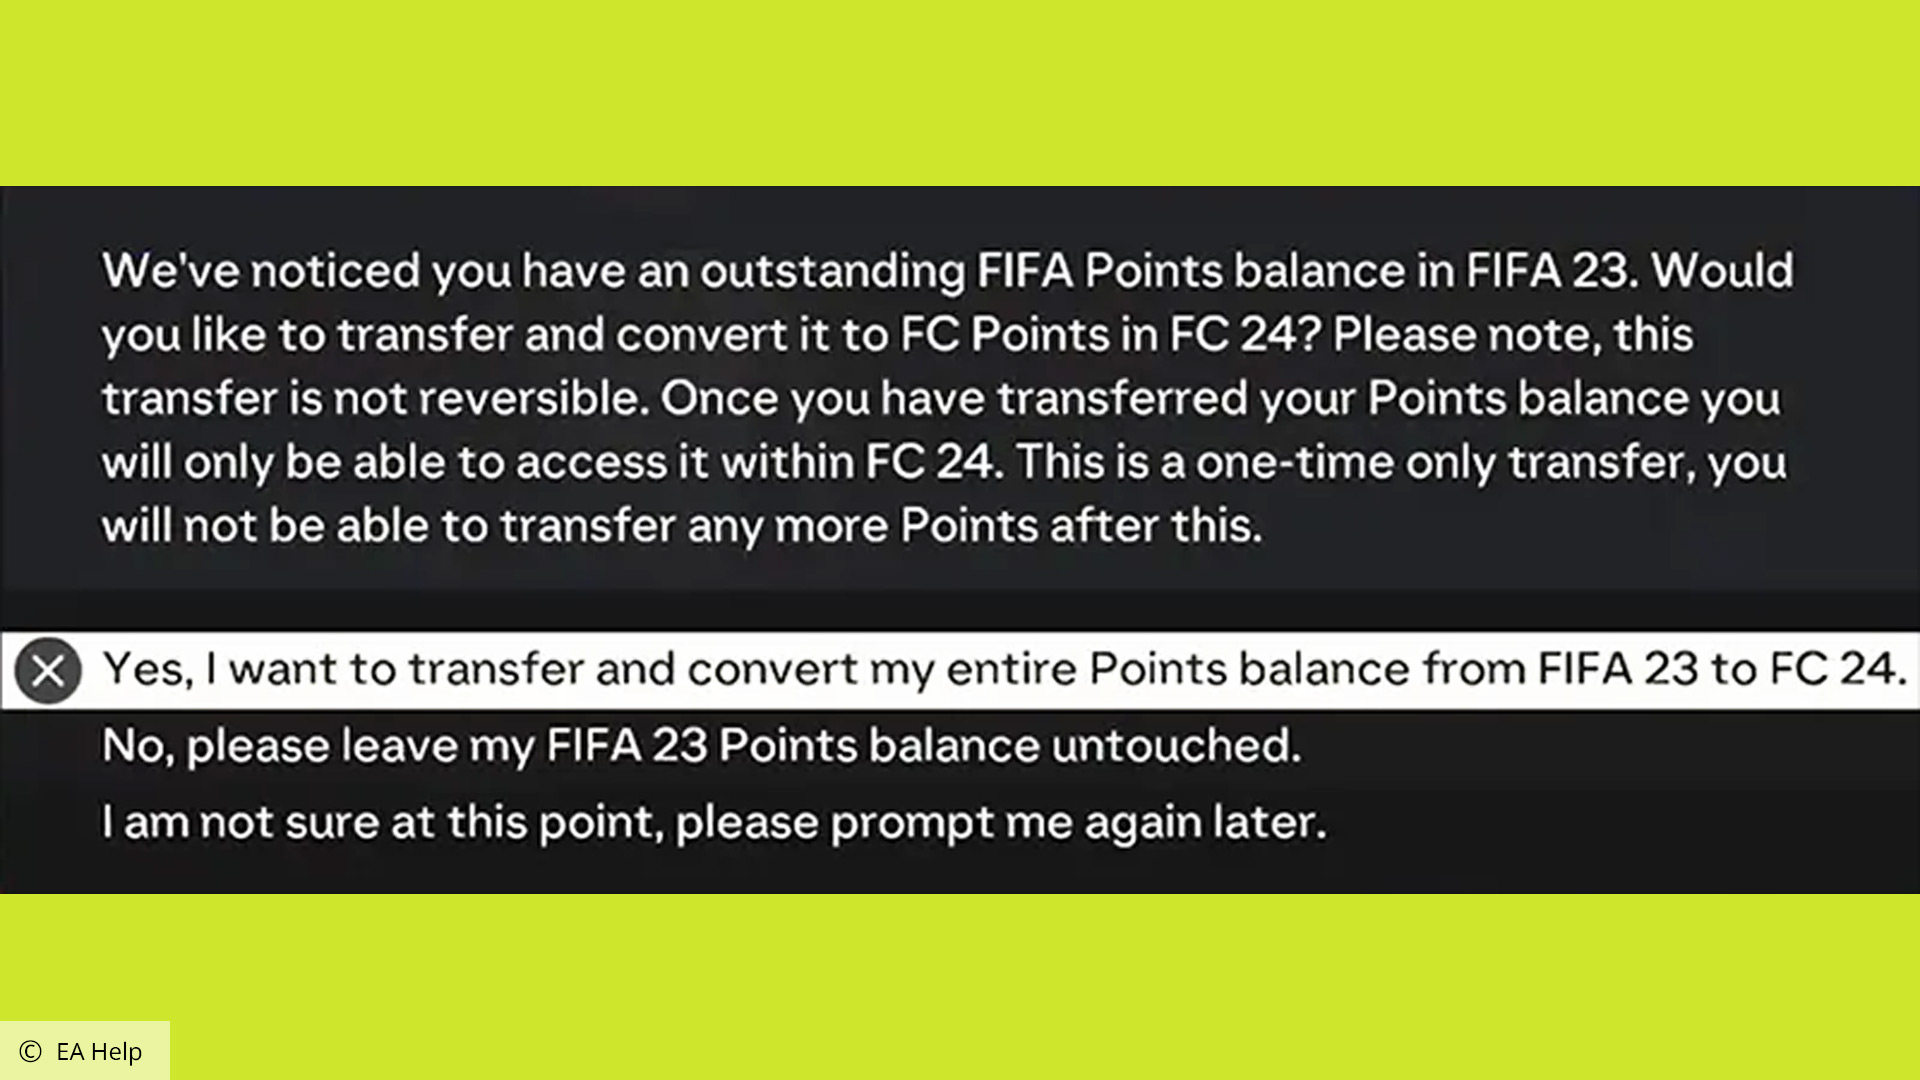 Re: How To Transfer Your FIFA points to FC points in EASFC24